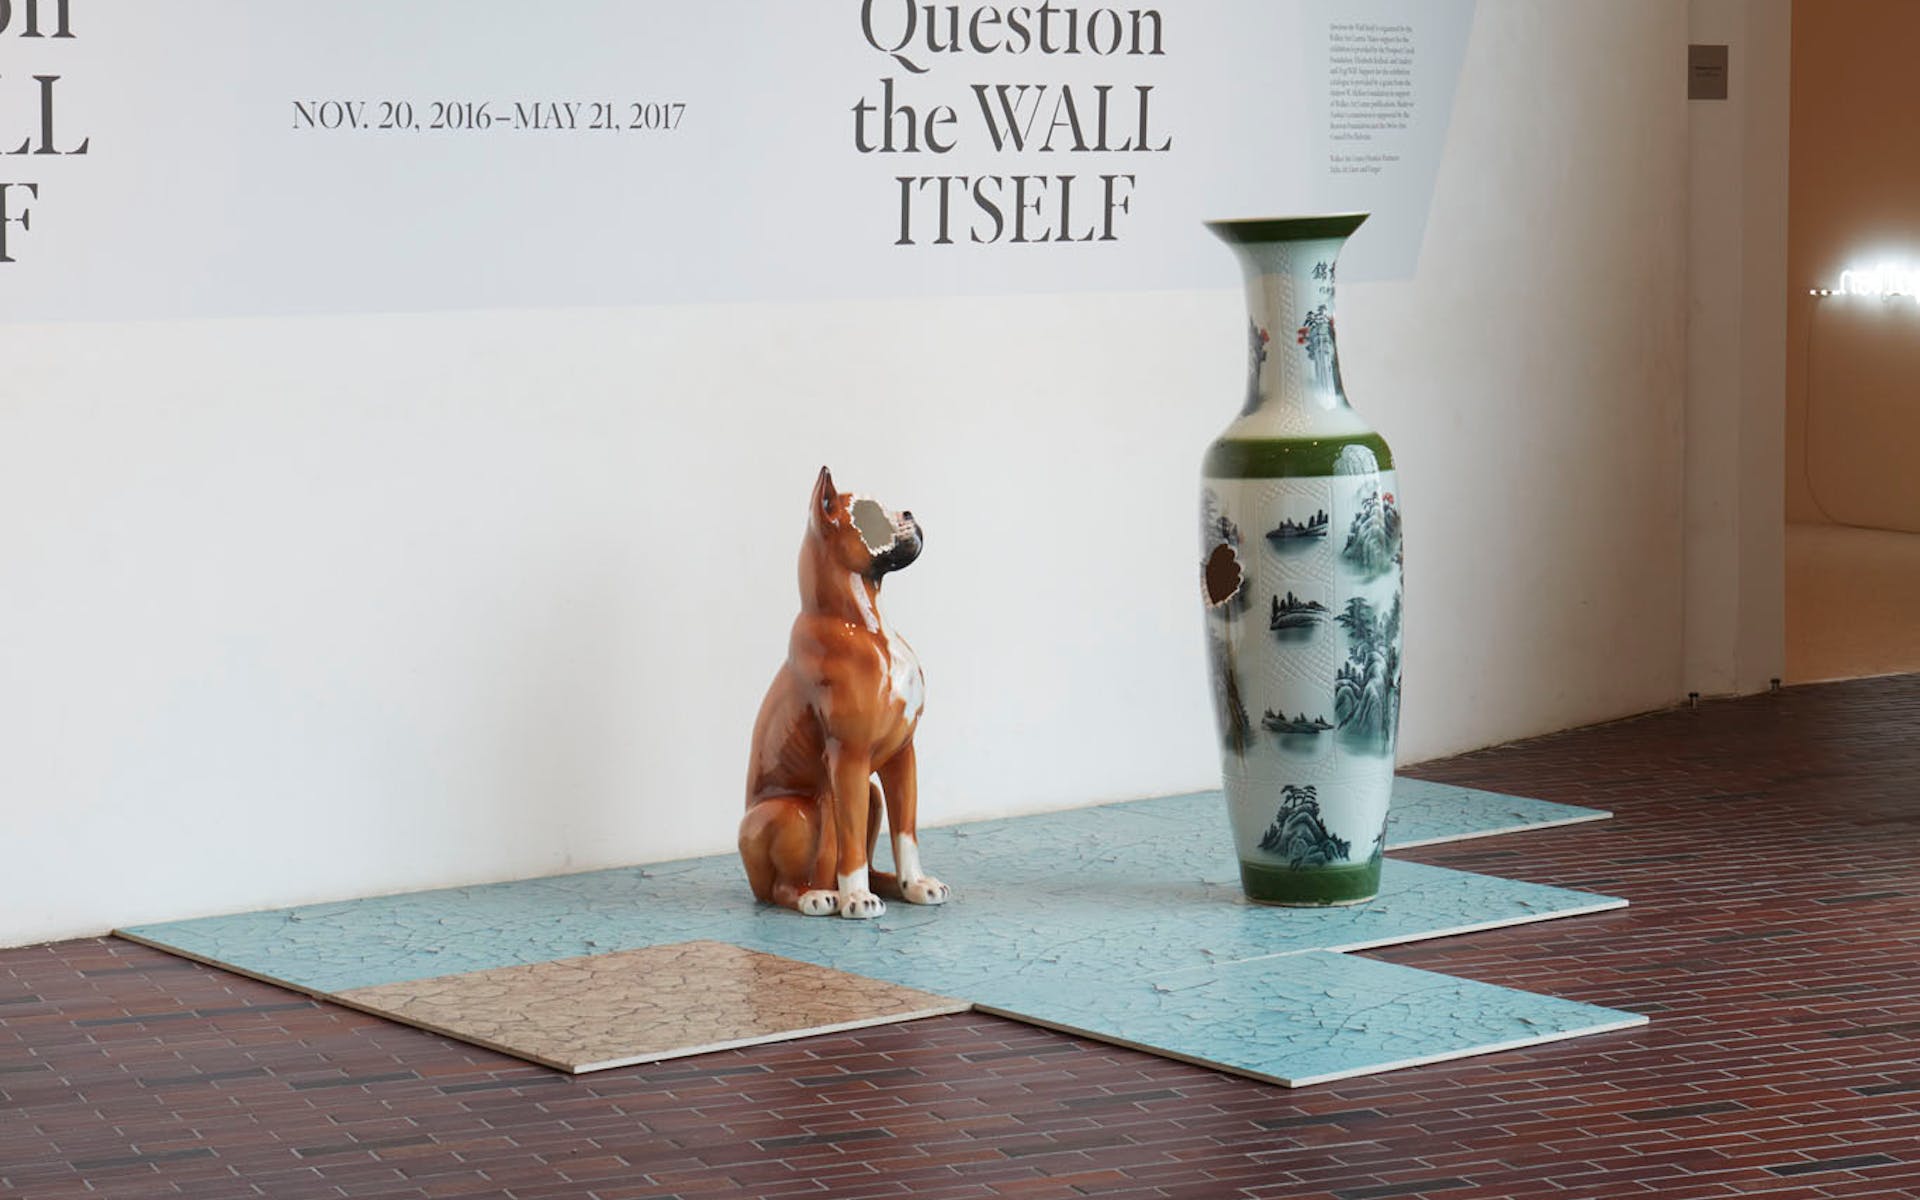 View of the exhibition Question the Wall Itself, 2016; Nina Beier, Selections from China, 2016; (floor) Nina Beier, Tileables, 2014 (Photo: Gene Pittman, ©Walker Art Center)